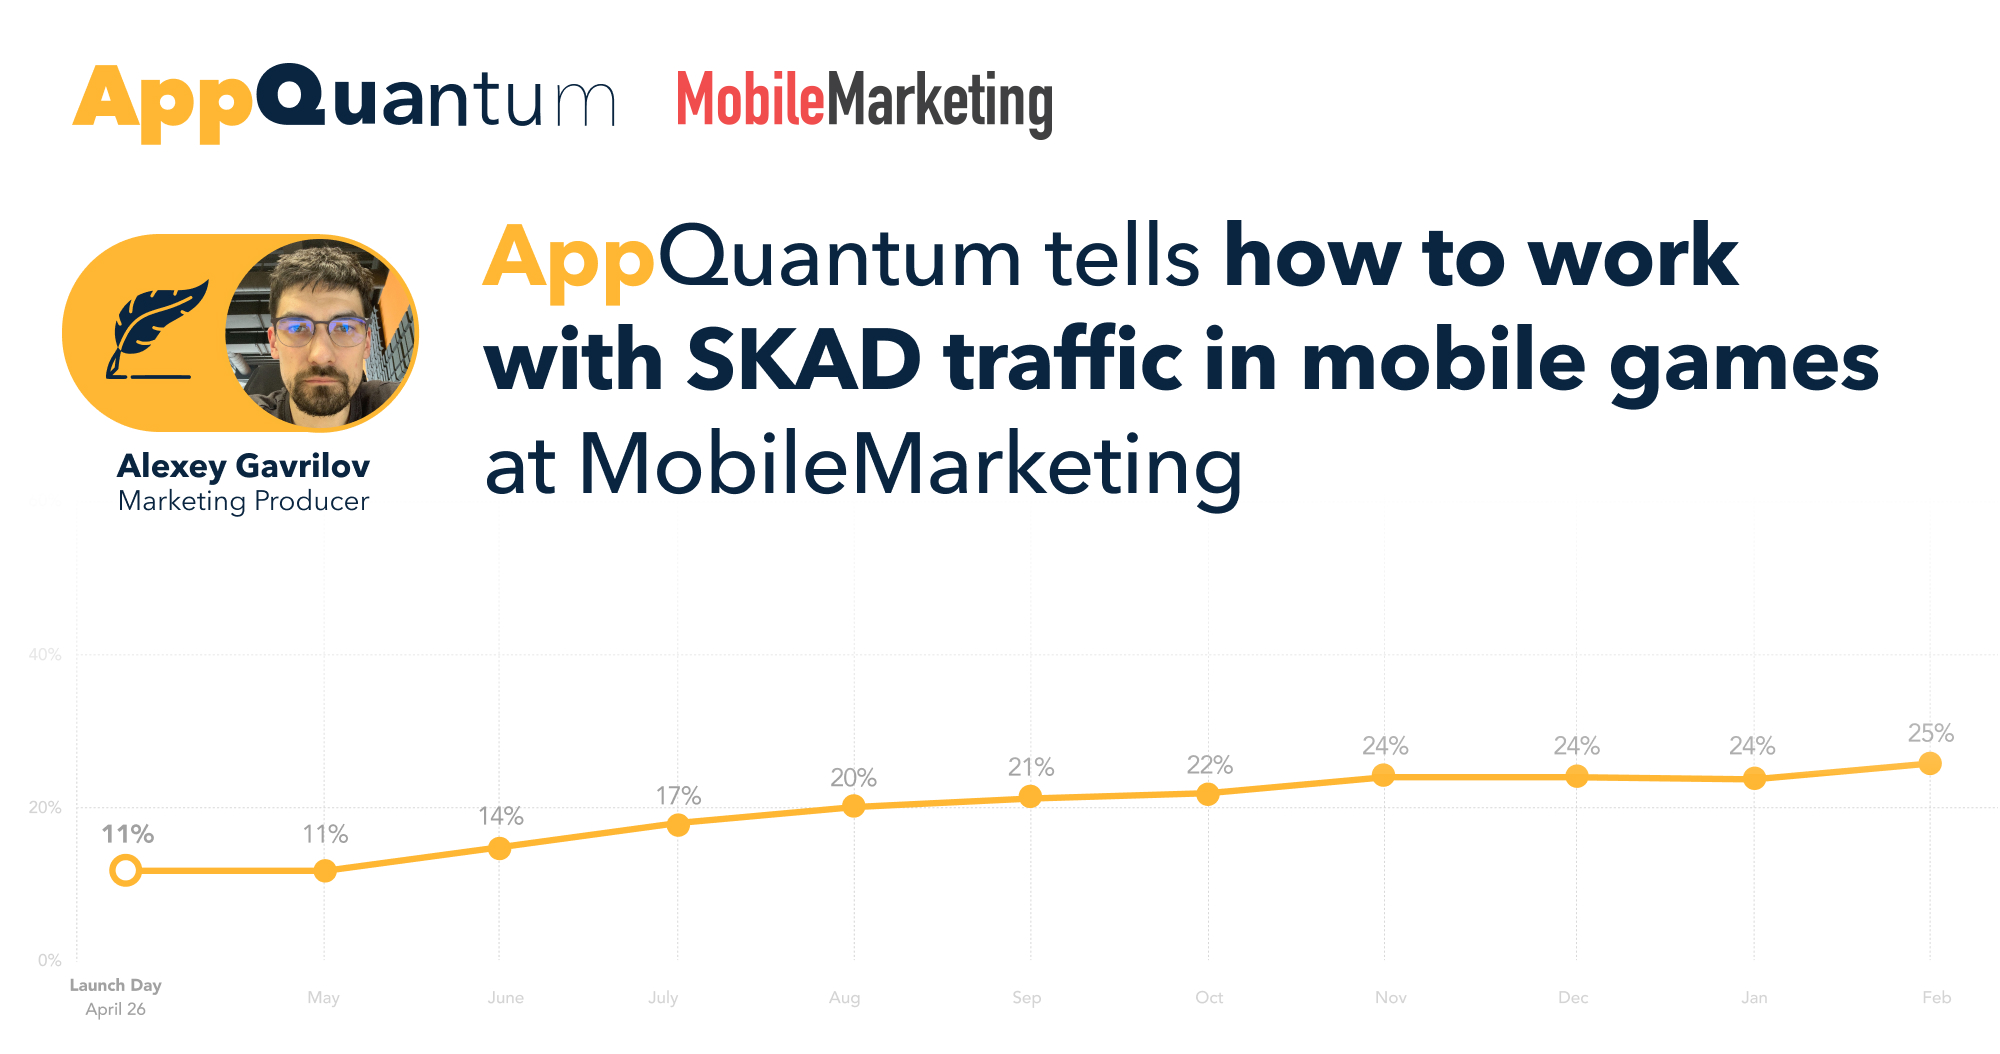 AppQuantum Tells How to Work with SKAD Traffic in Mobile Games at MobileMarketing